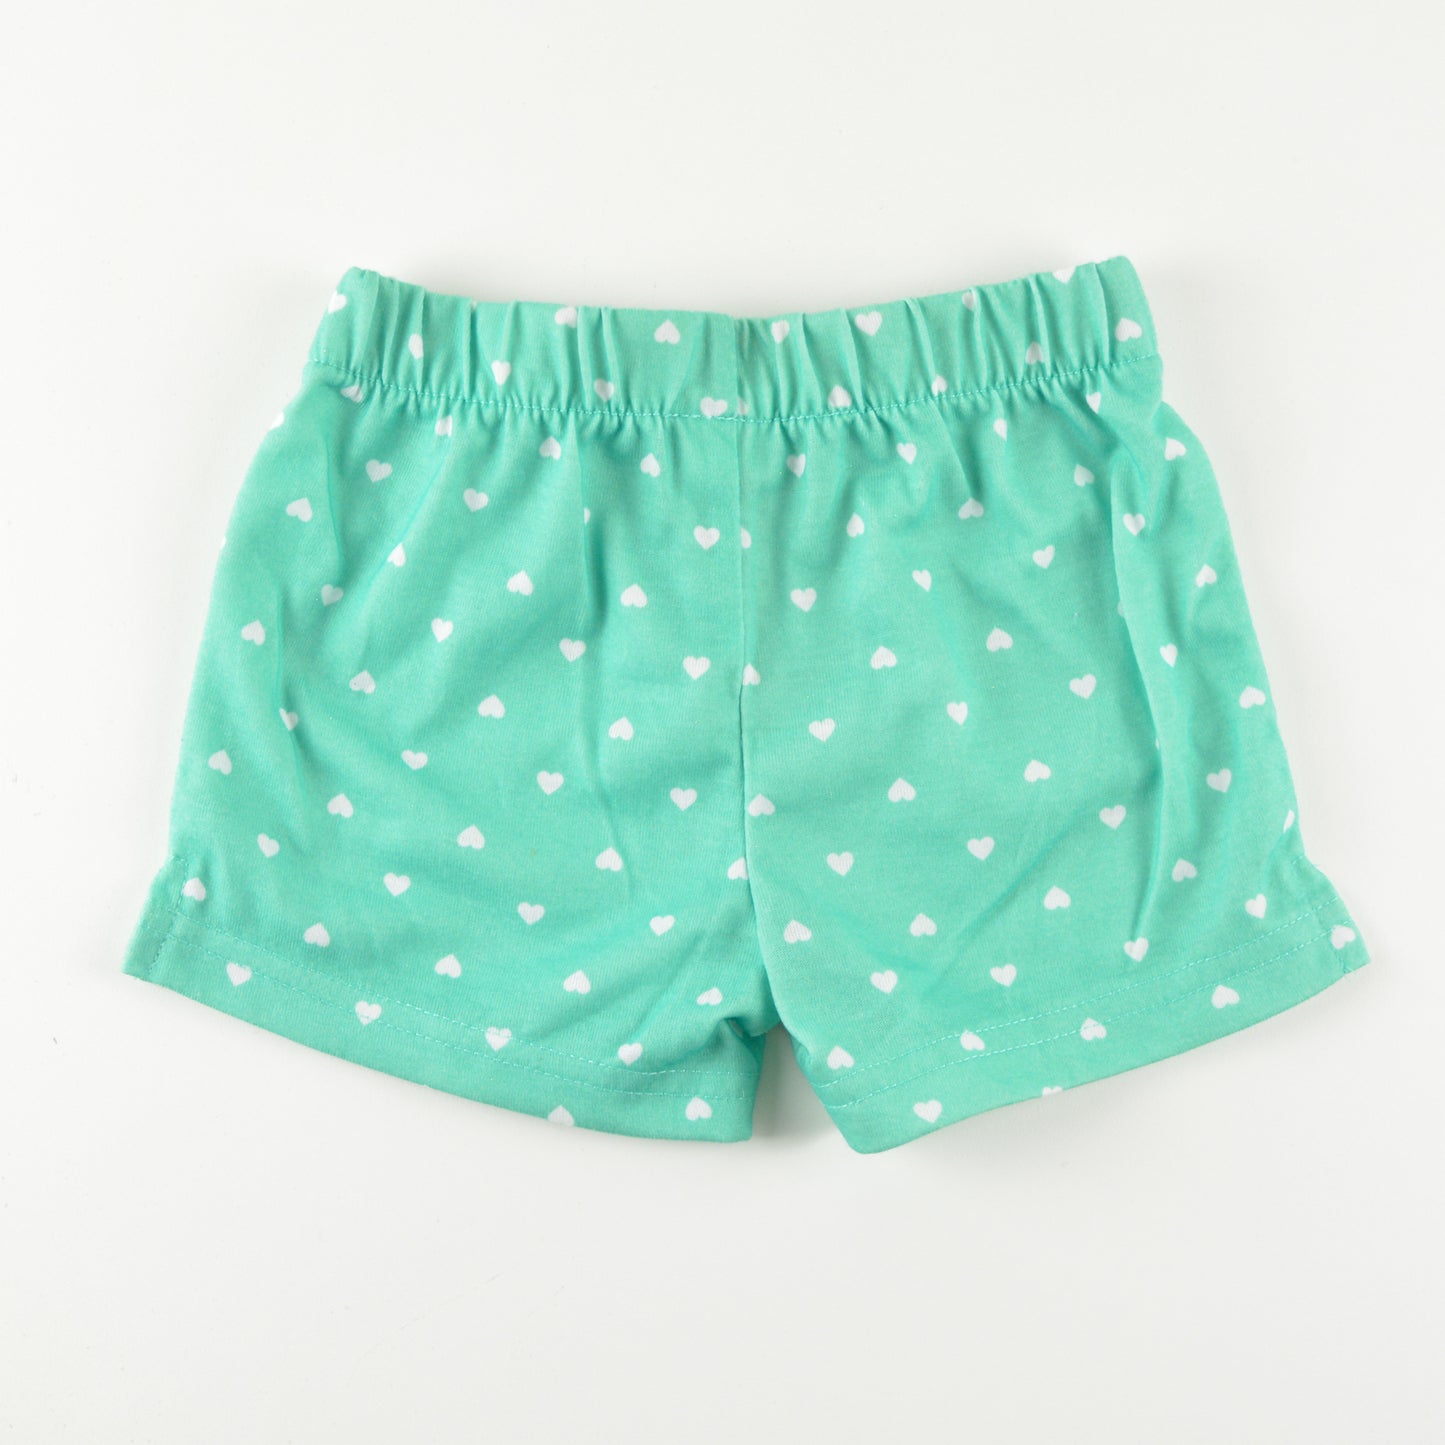 Aqua Shorts with hearts 12 months